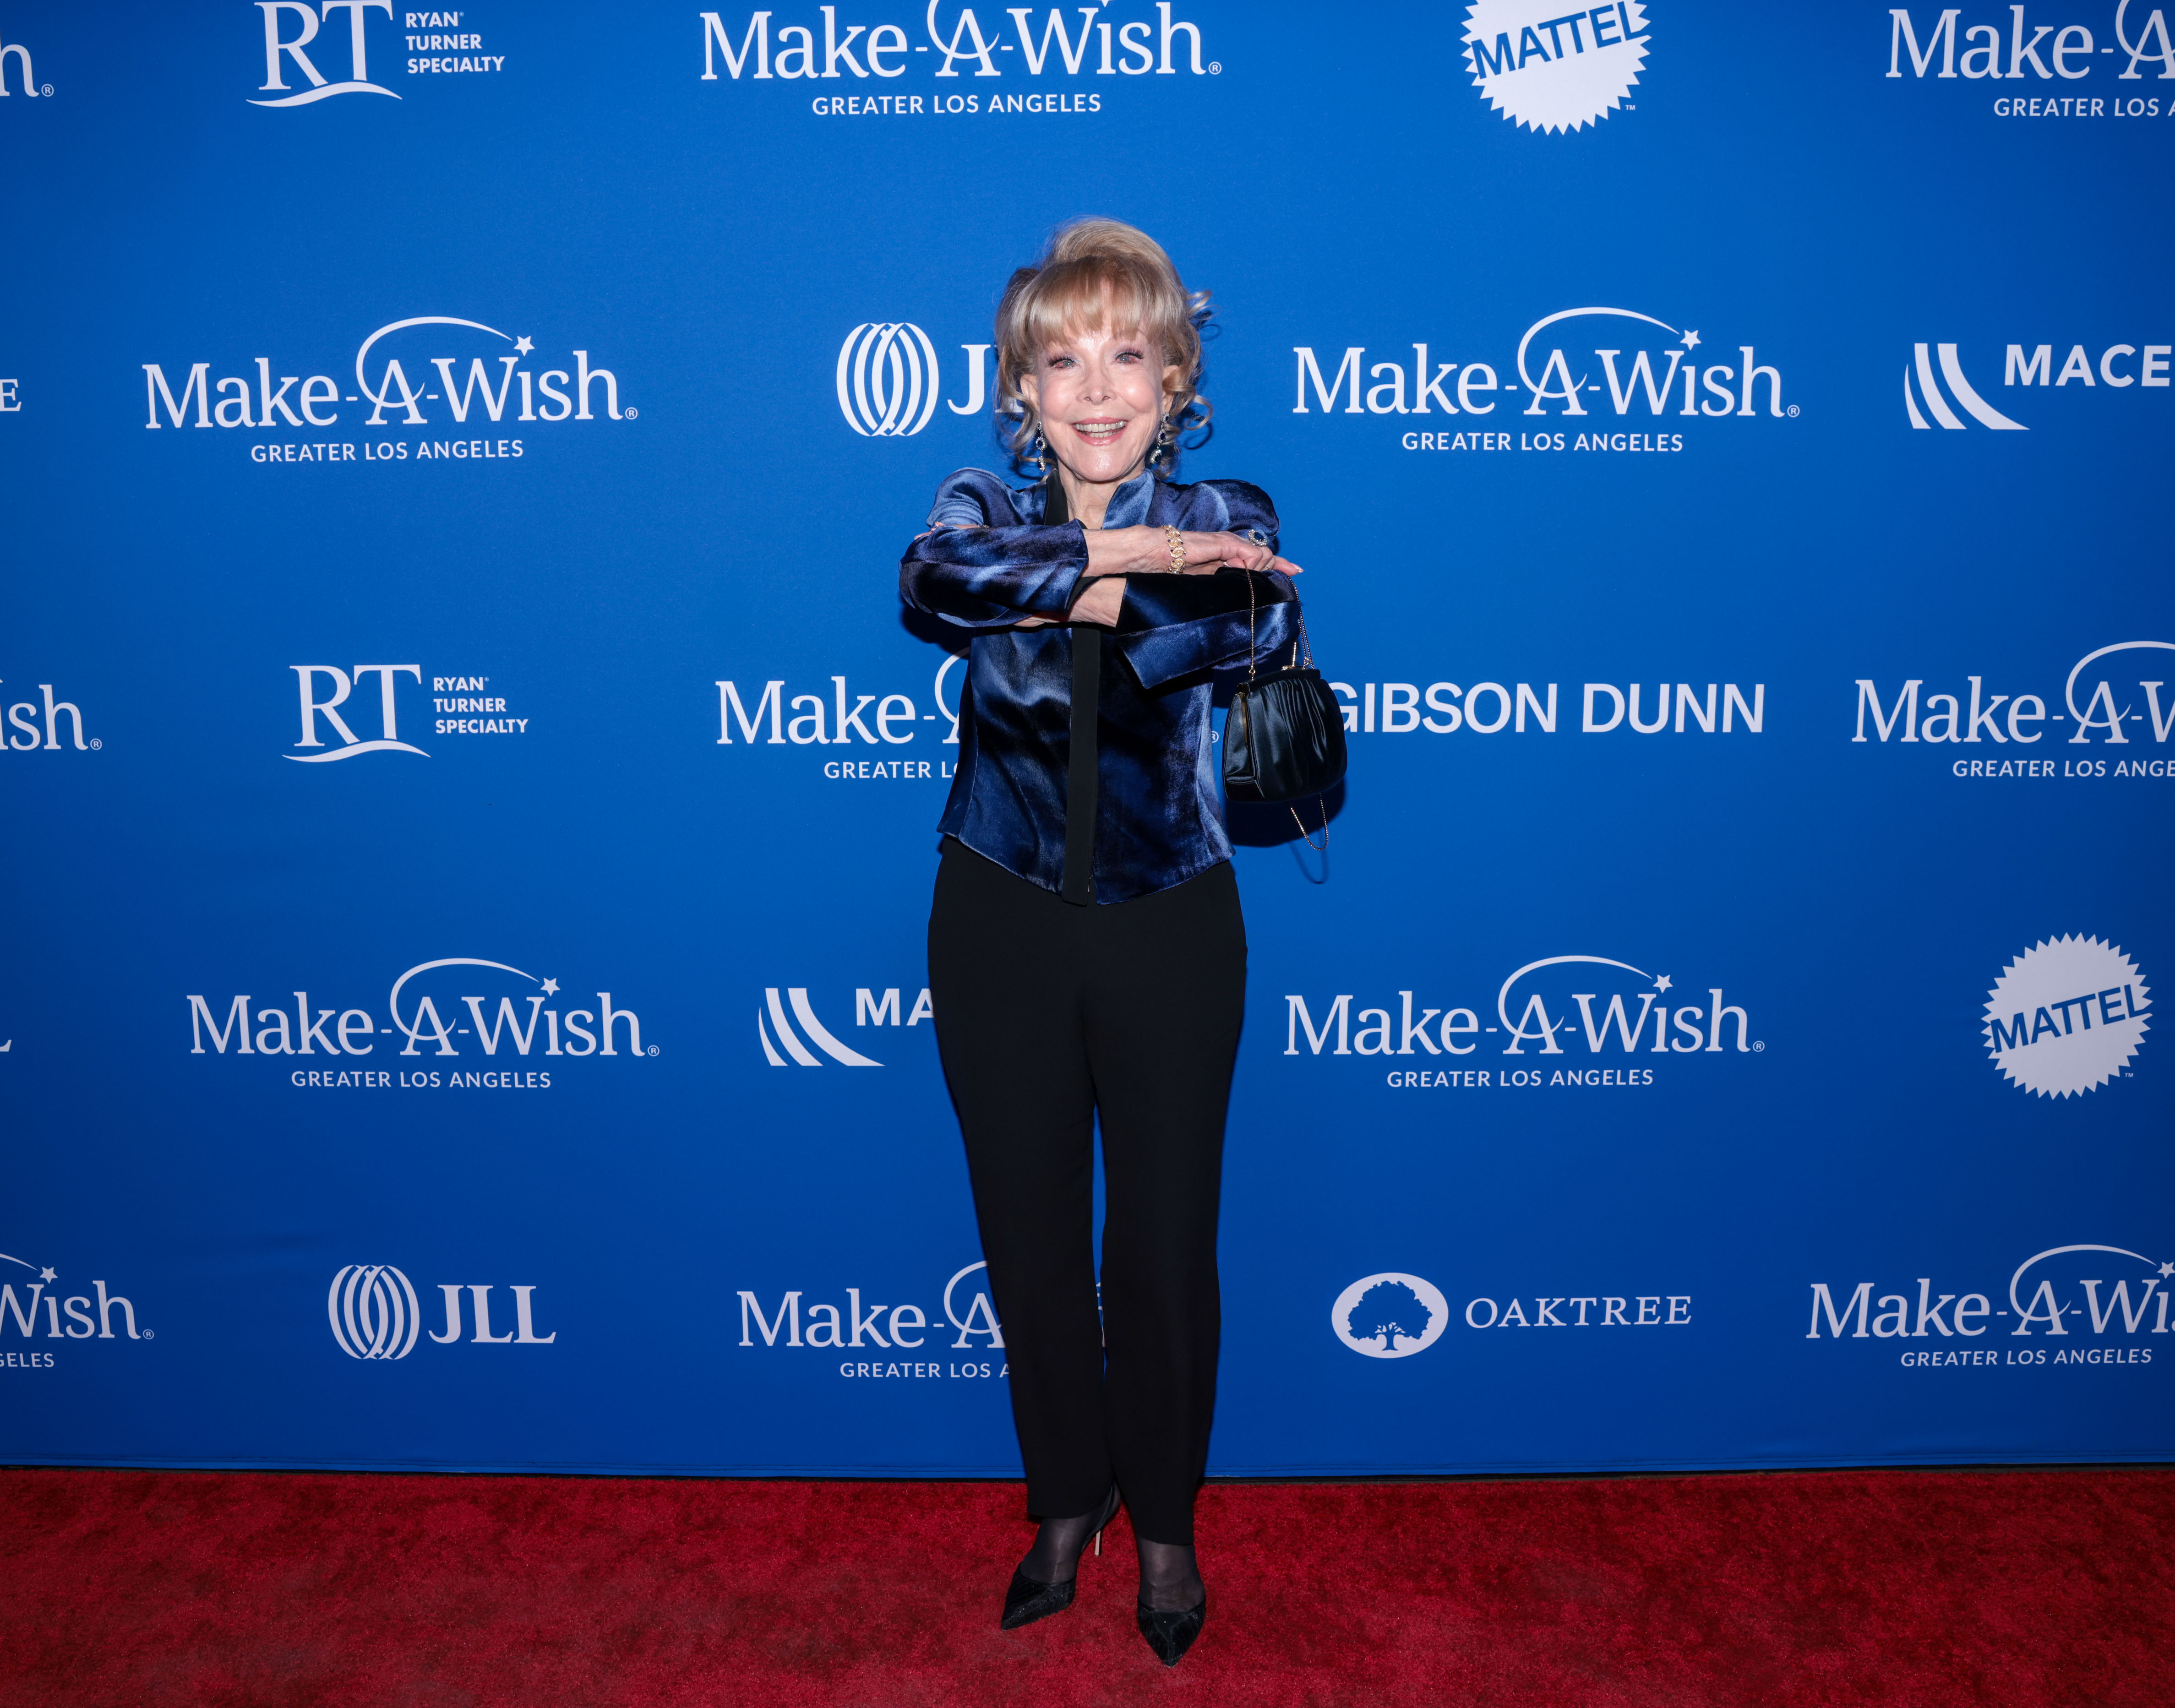 Barbara Eden poses with her arms covering her chest at Make-A-Wish Greater LA's Wish Gala on November 19, 2022, in Hollywood, California. | Source: Getty Images